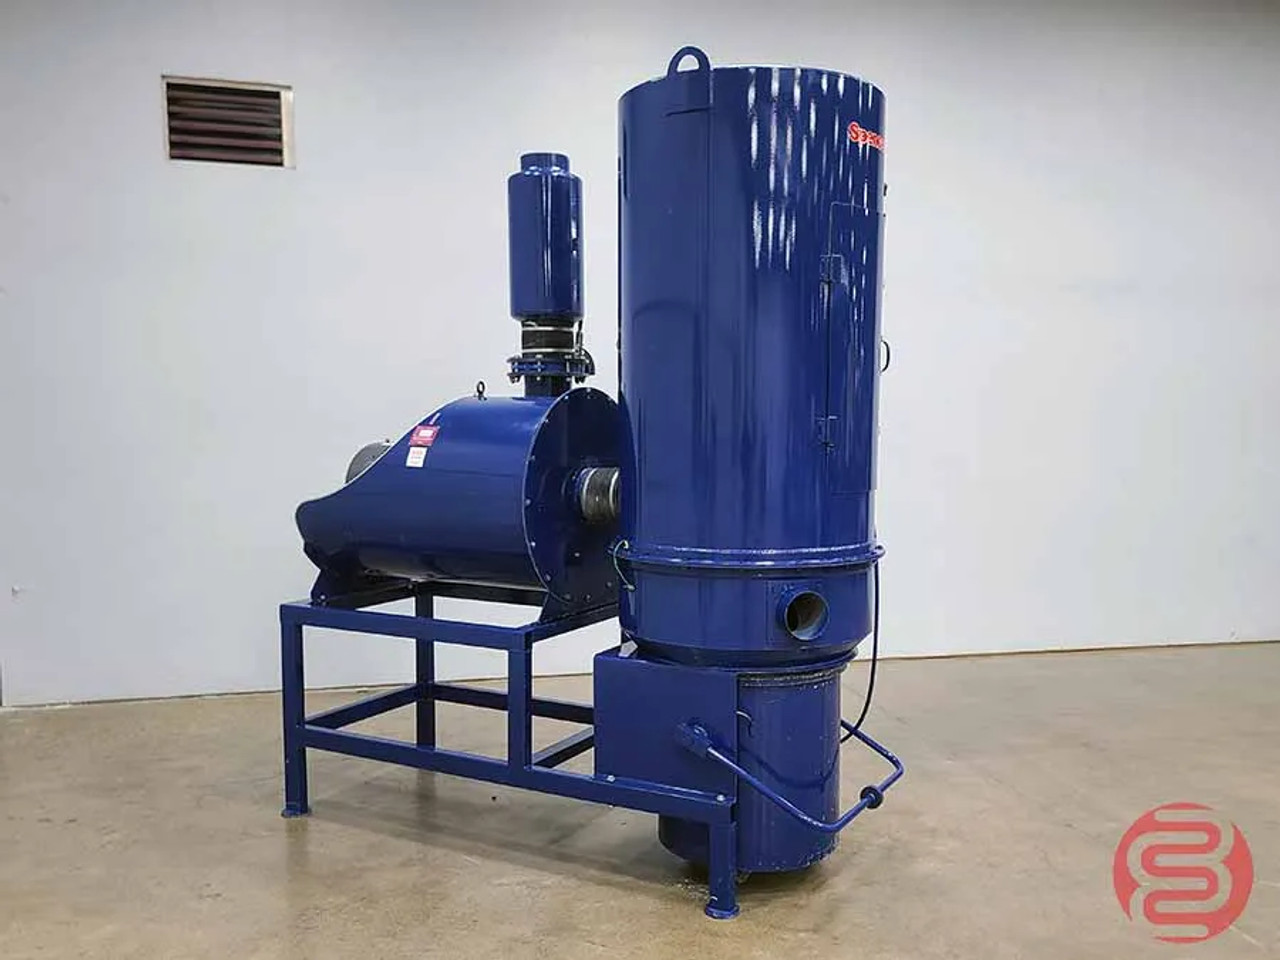 Spencer Series D Industrivac 25 HP Industrial Vacuum System SD325D